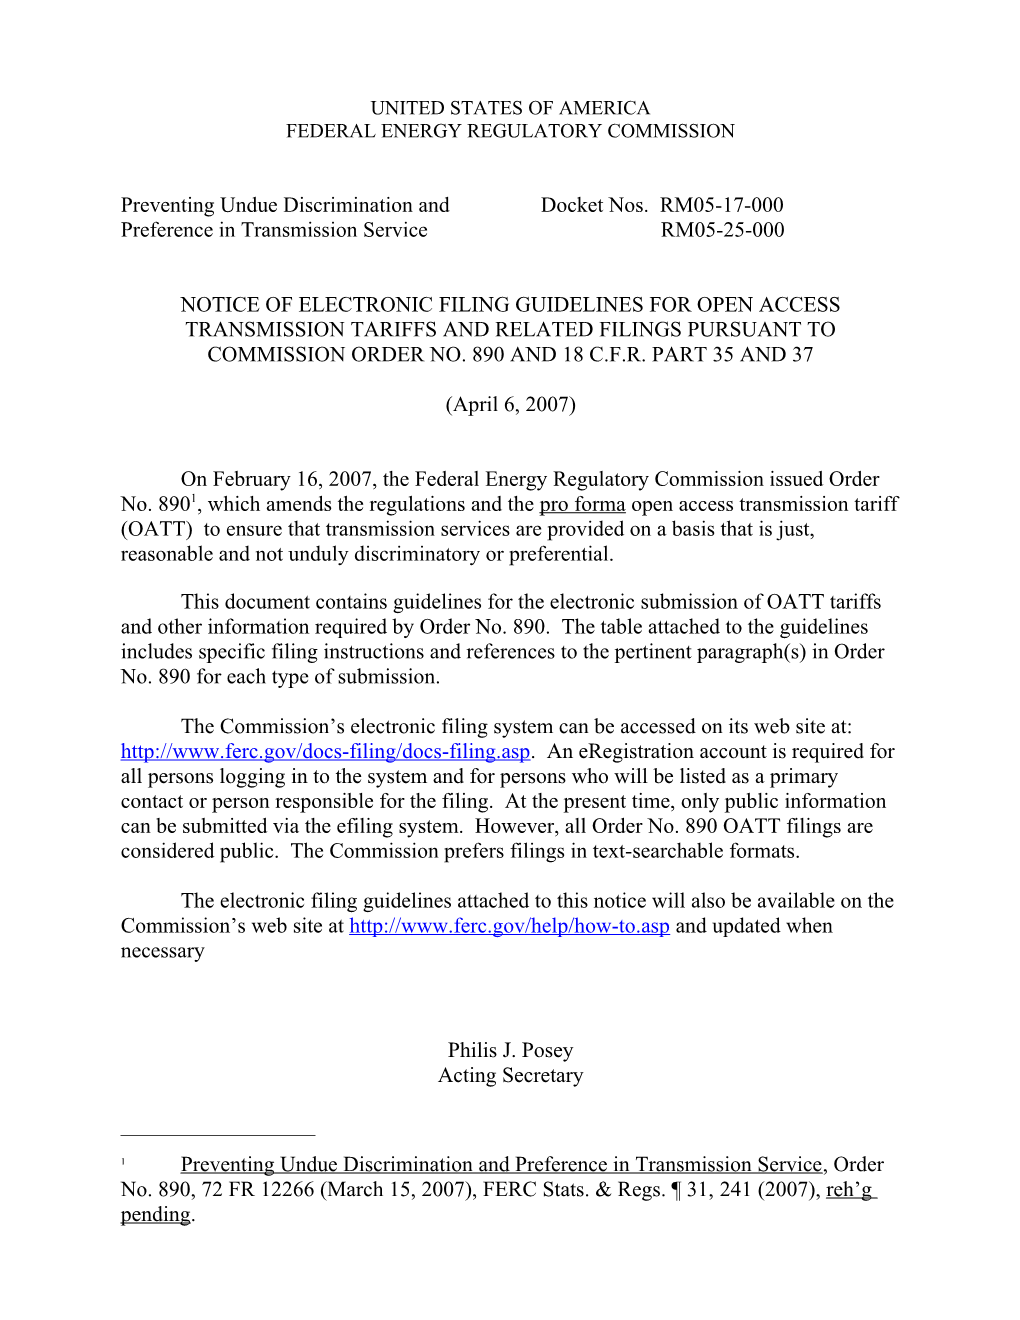 April 6, 2007 Notice of Guidelines for Open Access Transmission Tariffs Pursuant to Order